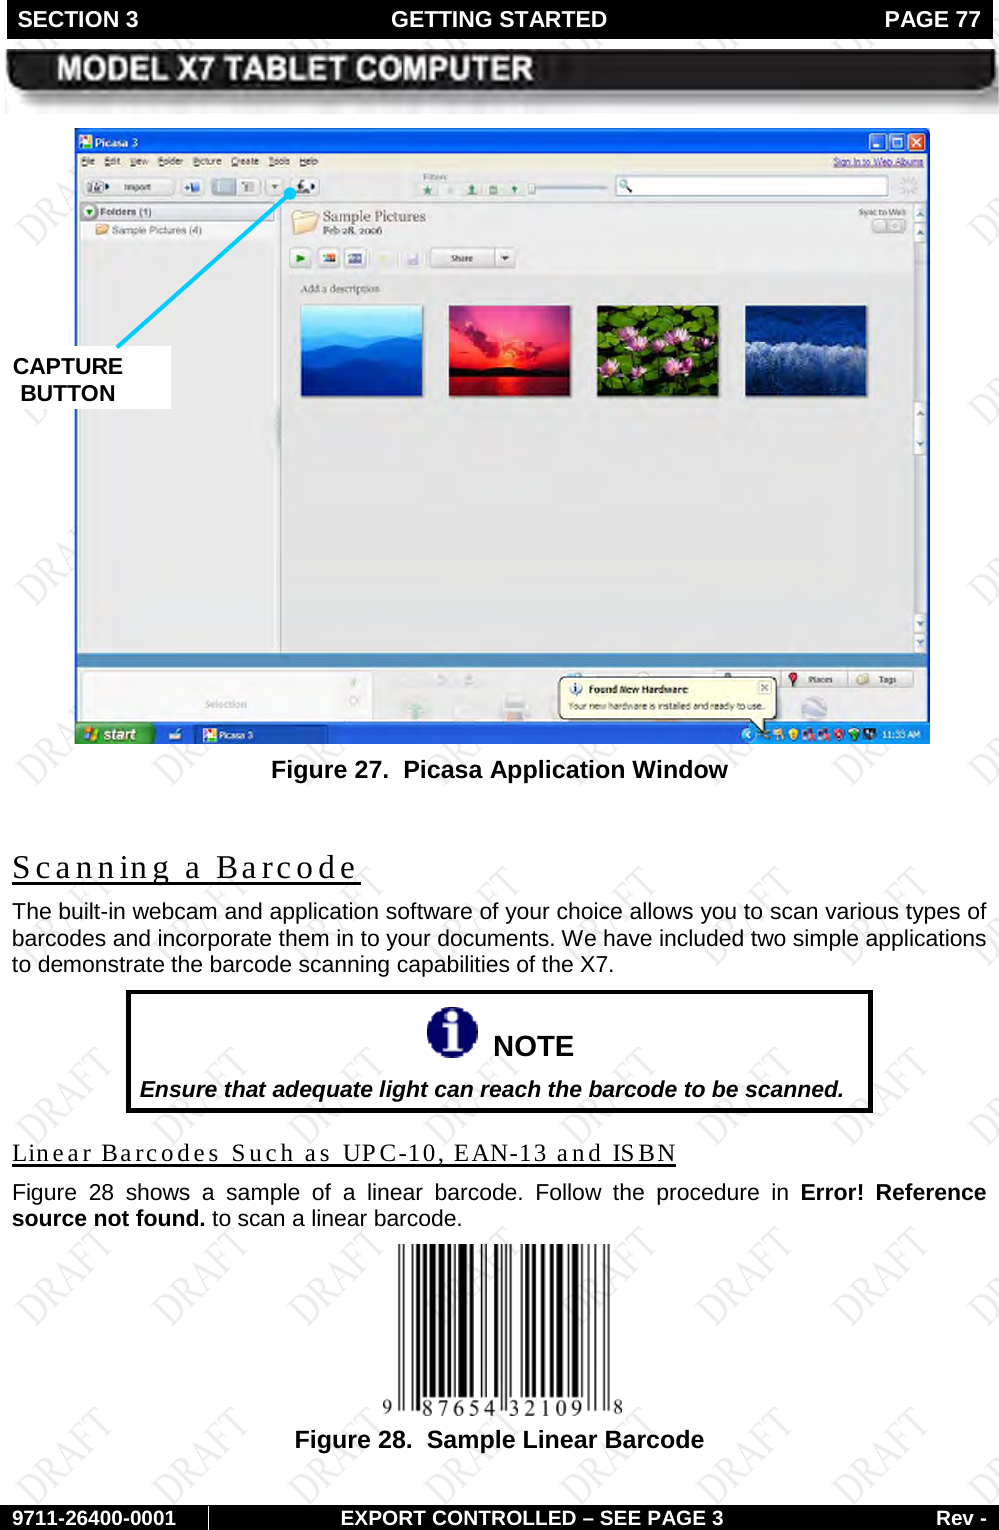 SECTION 3 GETTING STARTED  PAGE 77        9711-26400-0001 EXPORT CONTROLLED – SEE PAGE 3 Rev -  Figure 27.  Picasa Application Window  The built-in webcam and application software of your choice allows you to scan various types of barcodes and incorporate them in to your documents. We have included two simple applications to demonstrate the barcode scanning capabilities of the X7. Scanning a Barcode   NOTE Ensure that adequate light can reach the barcode to be scanned. Figure  28Linear Barcodes Such as UPC-10, EAN-13 and ISBN  shows a sample of a linear barcode. Follow the procedure in Error! Reference source not found. to scan a linear barcode.  Figure 28.  Sample Linear Barcode   CAPTURE BUTTON 